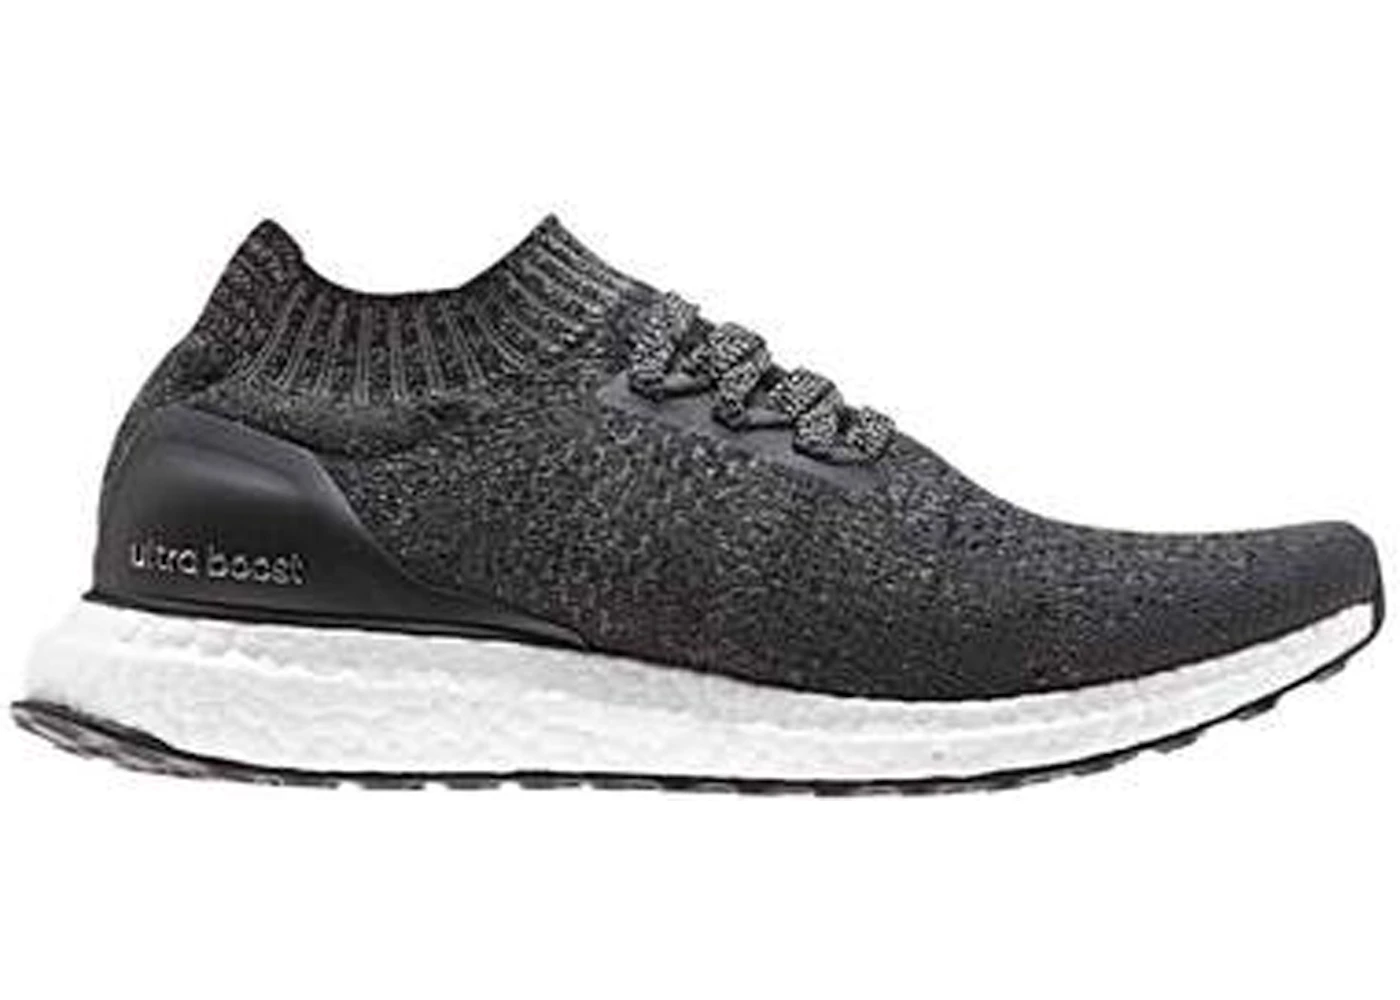 adidas Ultra Boost Uncaged Carbon Core Black (Women's) - DB1133 - US